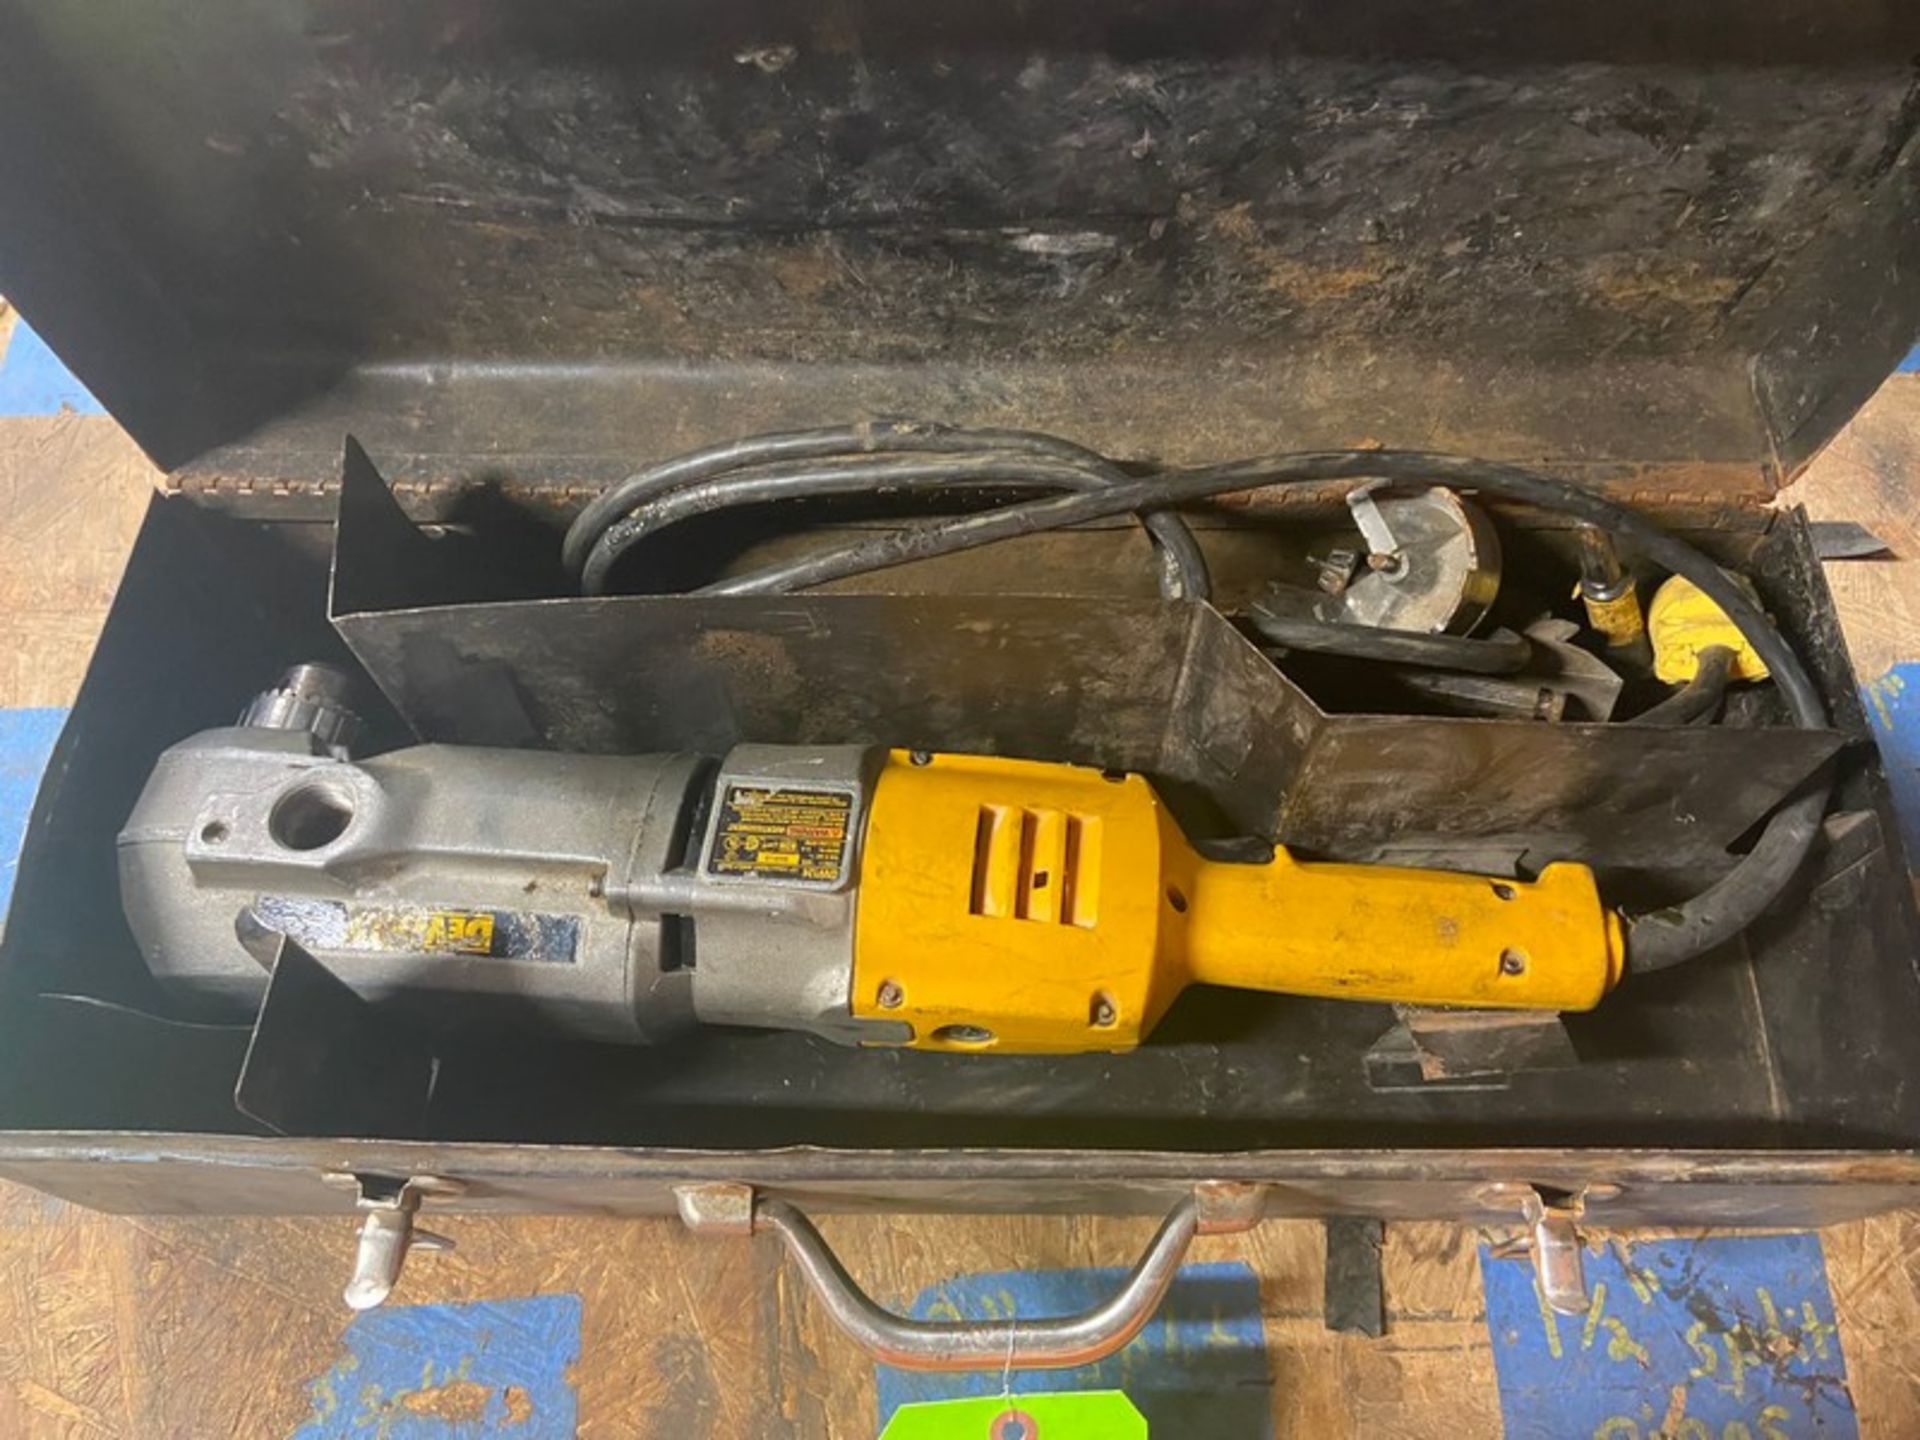 DeWalt Right Angle Drill, M/N DW124, with Power Cord & Hard Case (LOCATED IN MONROEVILLE, PA) - Image 2 of 5